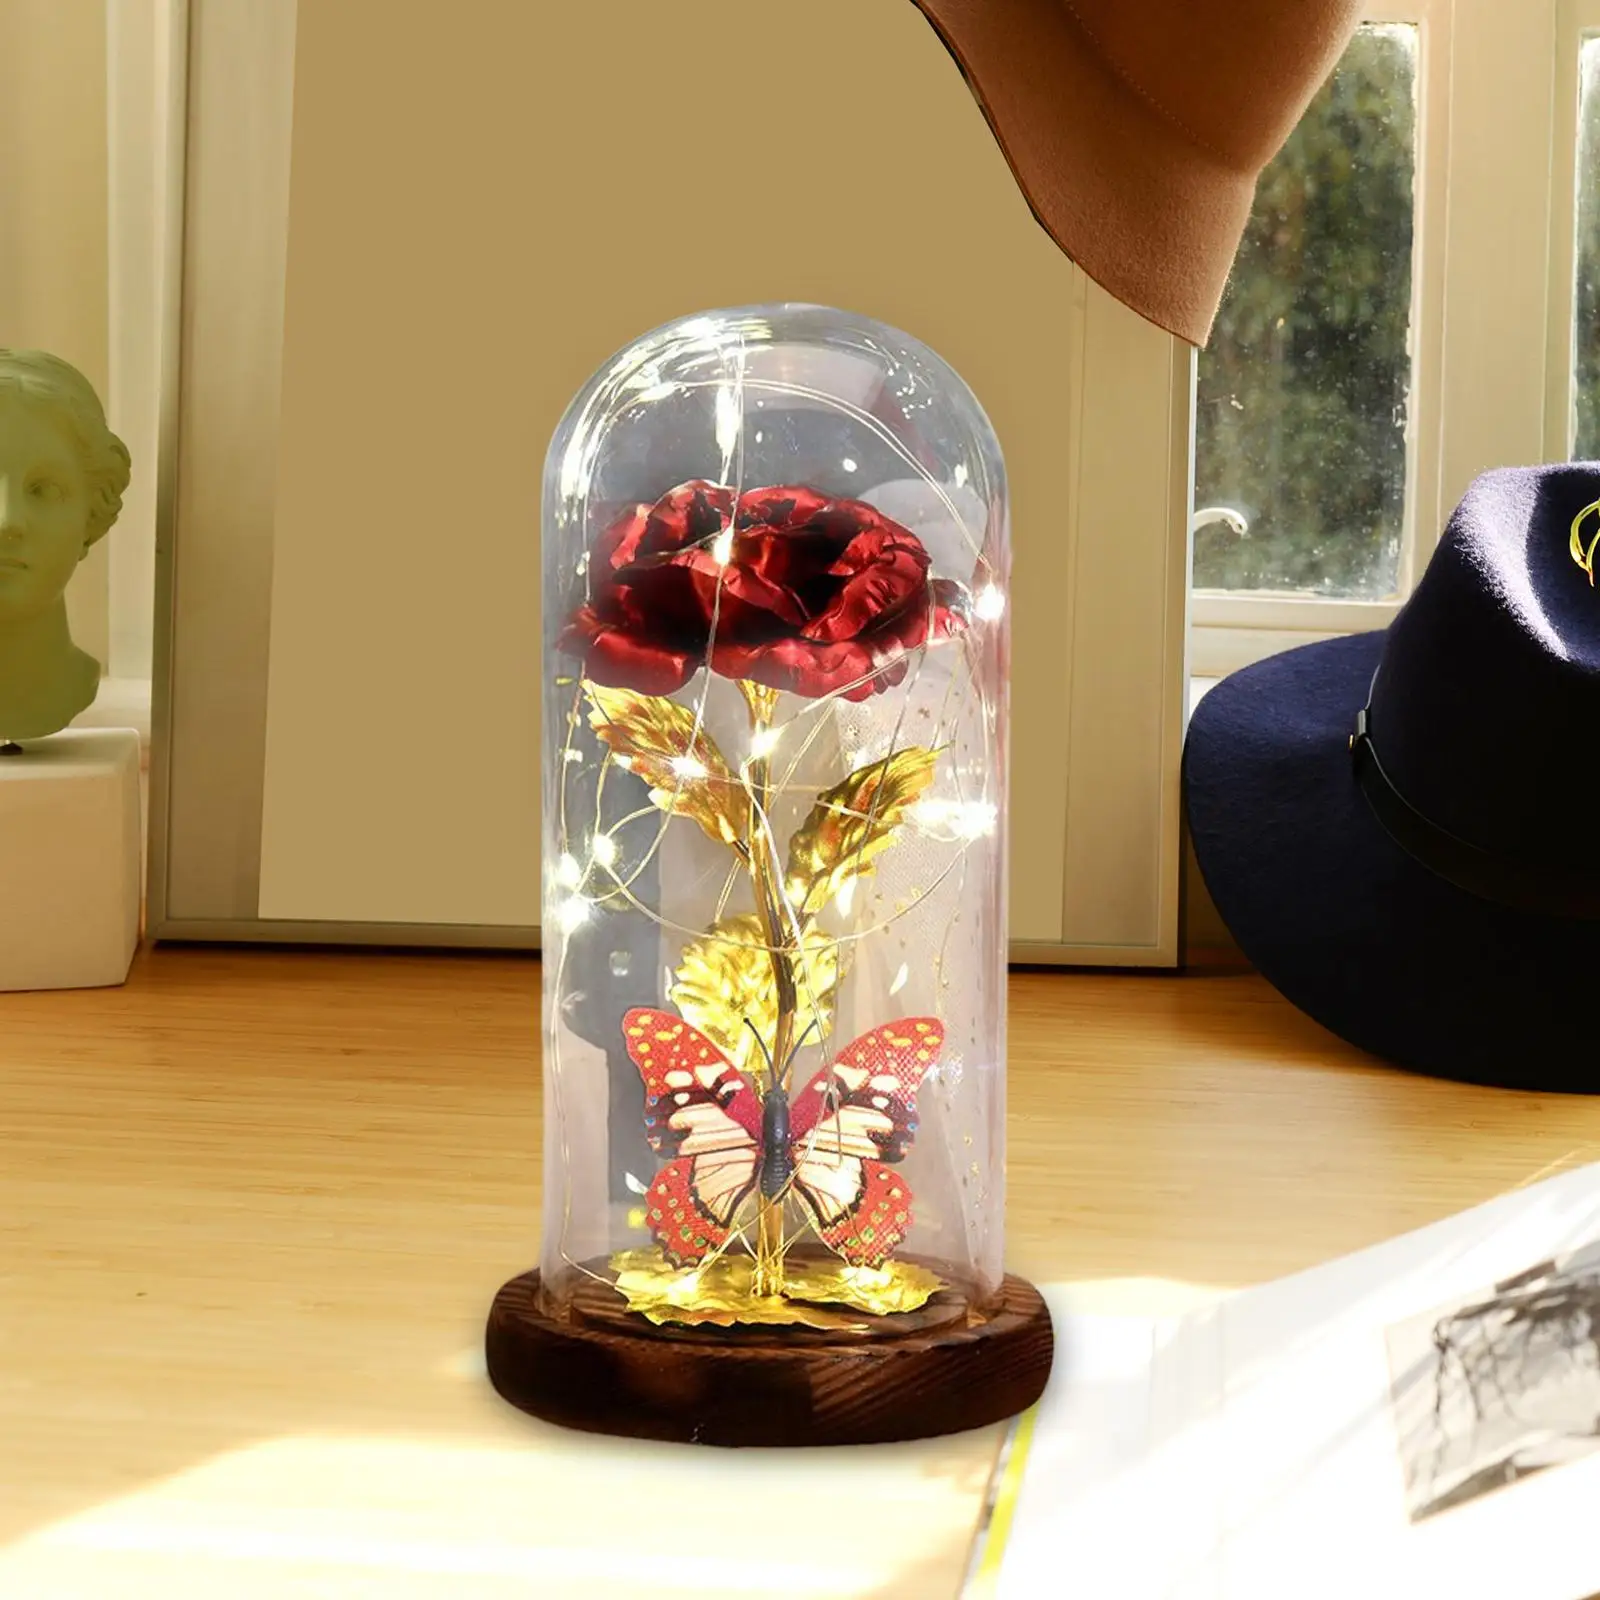 Rose Flower Ornaments Decorative Glass Cover Crafts LED Night Light for Birthday Desktop Gift Dining Room Home Decorations